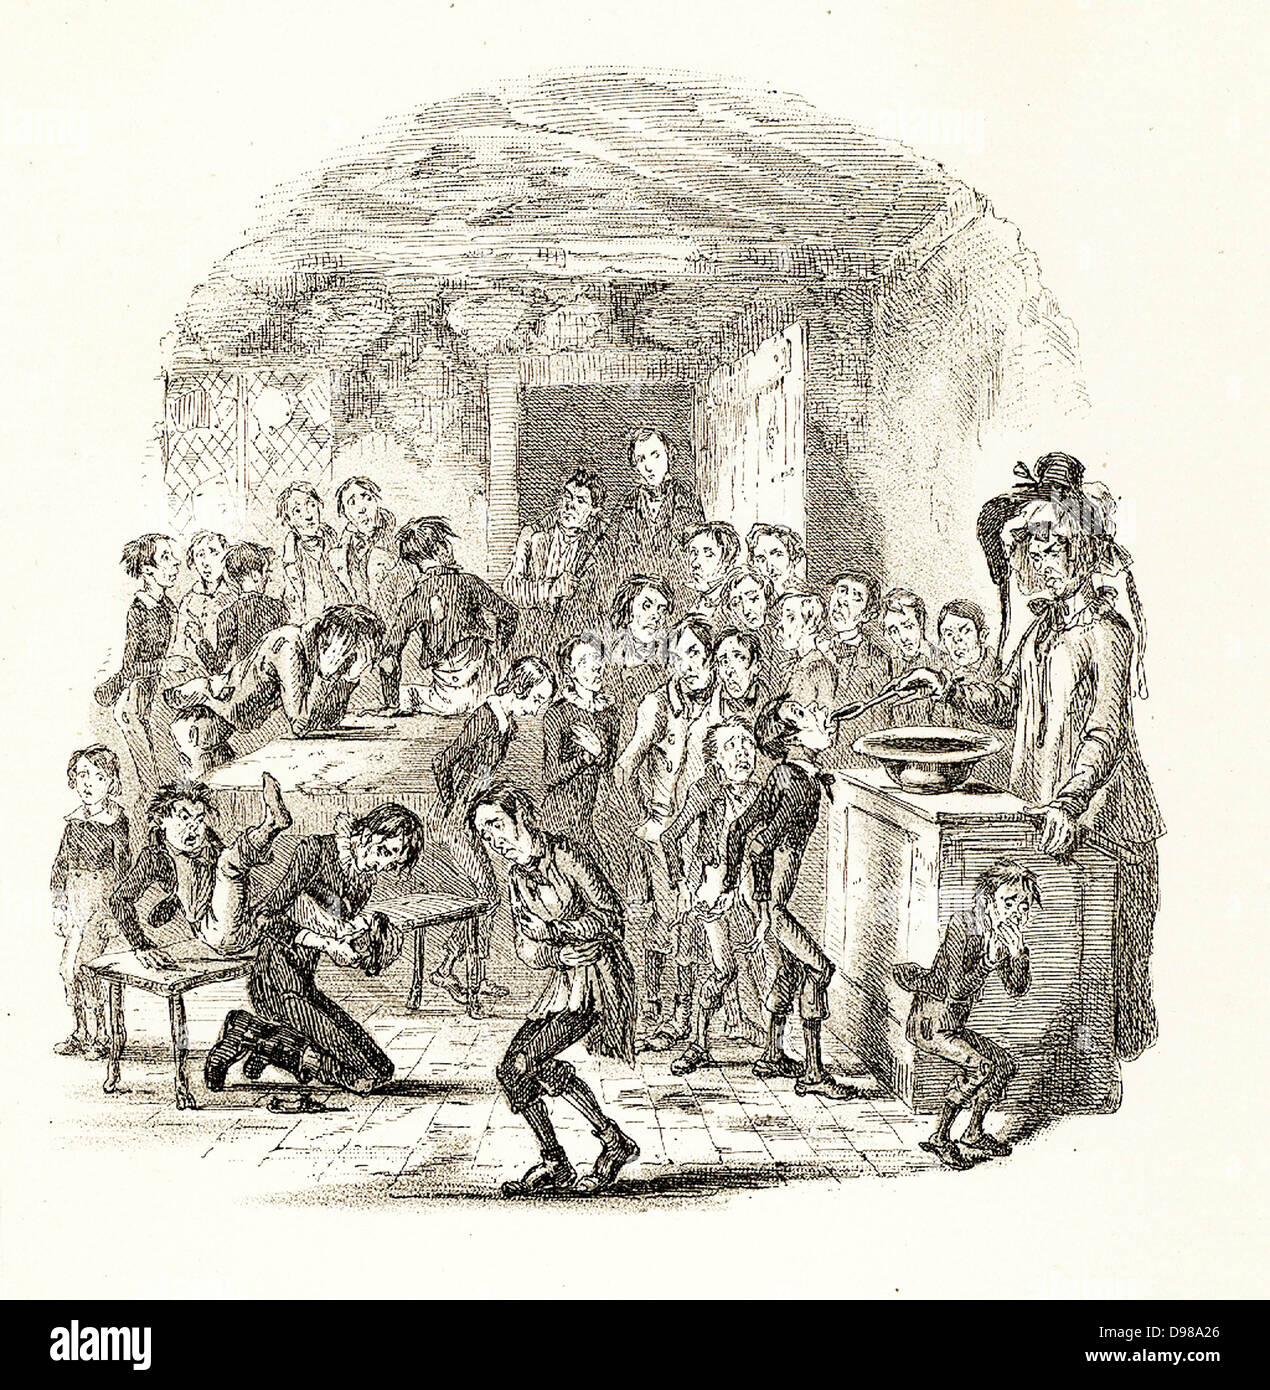 Mrs Squeers administering a compulsory dose of brimstone and treacle to the starving pupils of Dotheboys Hall. Illustration by 'Phiz' (Hablot Knight Browne) for Charles Dickens 'Nicholas Nickelby', London, 1838-1839. Based on research in Yorkshire, the publication of the book was instrumental in the government drawing up stricter regulations. Stock Photo